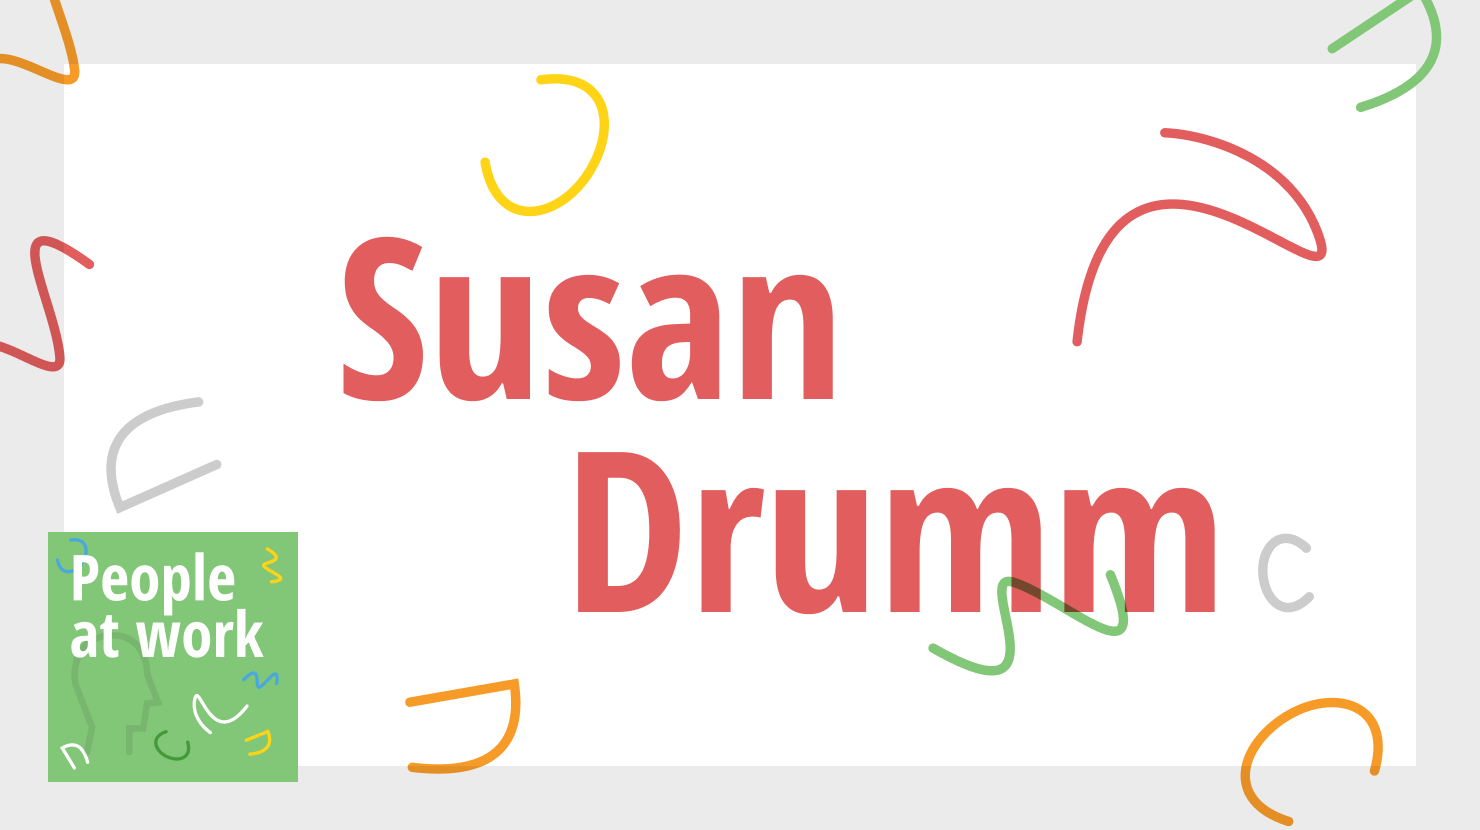 A different way to build resilience with Susan Drumm